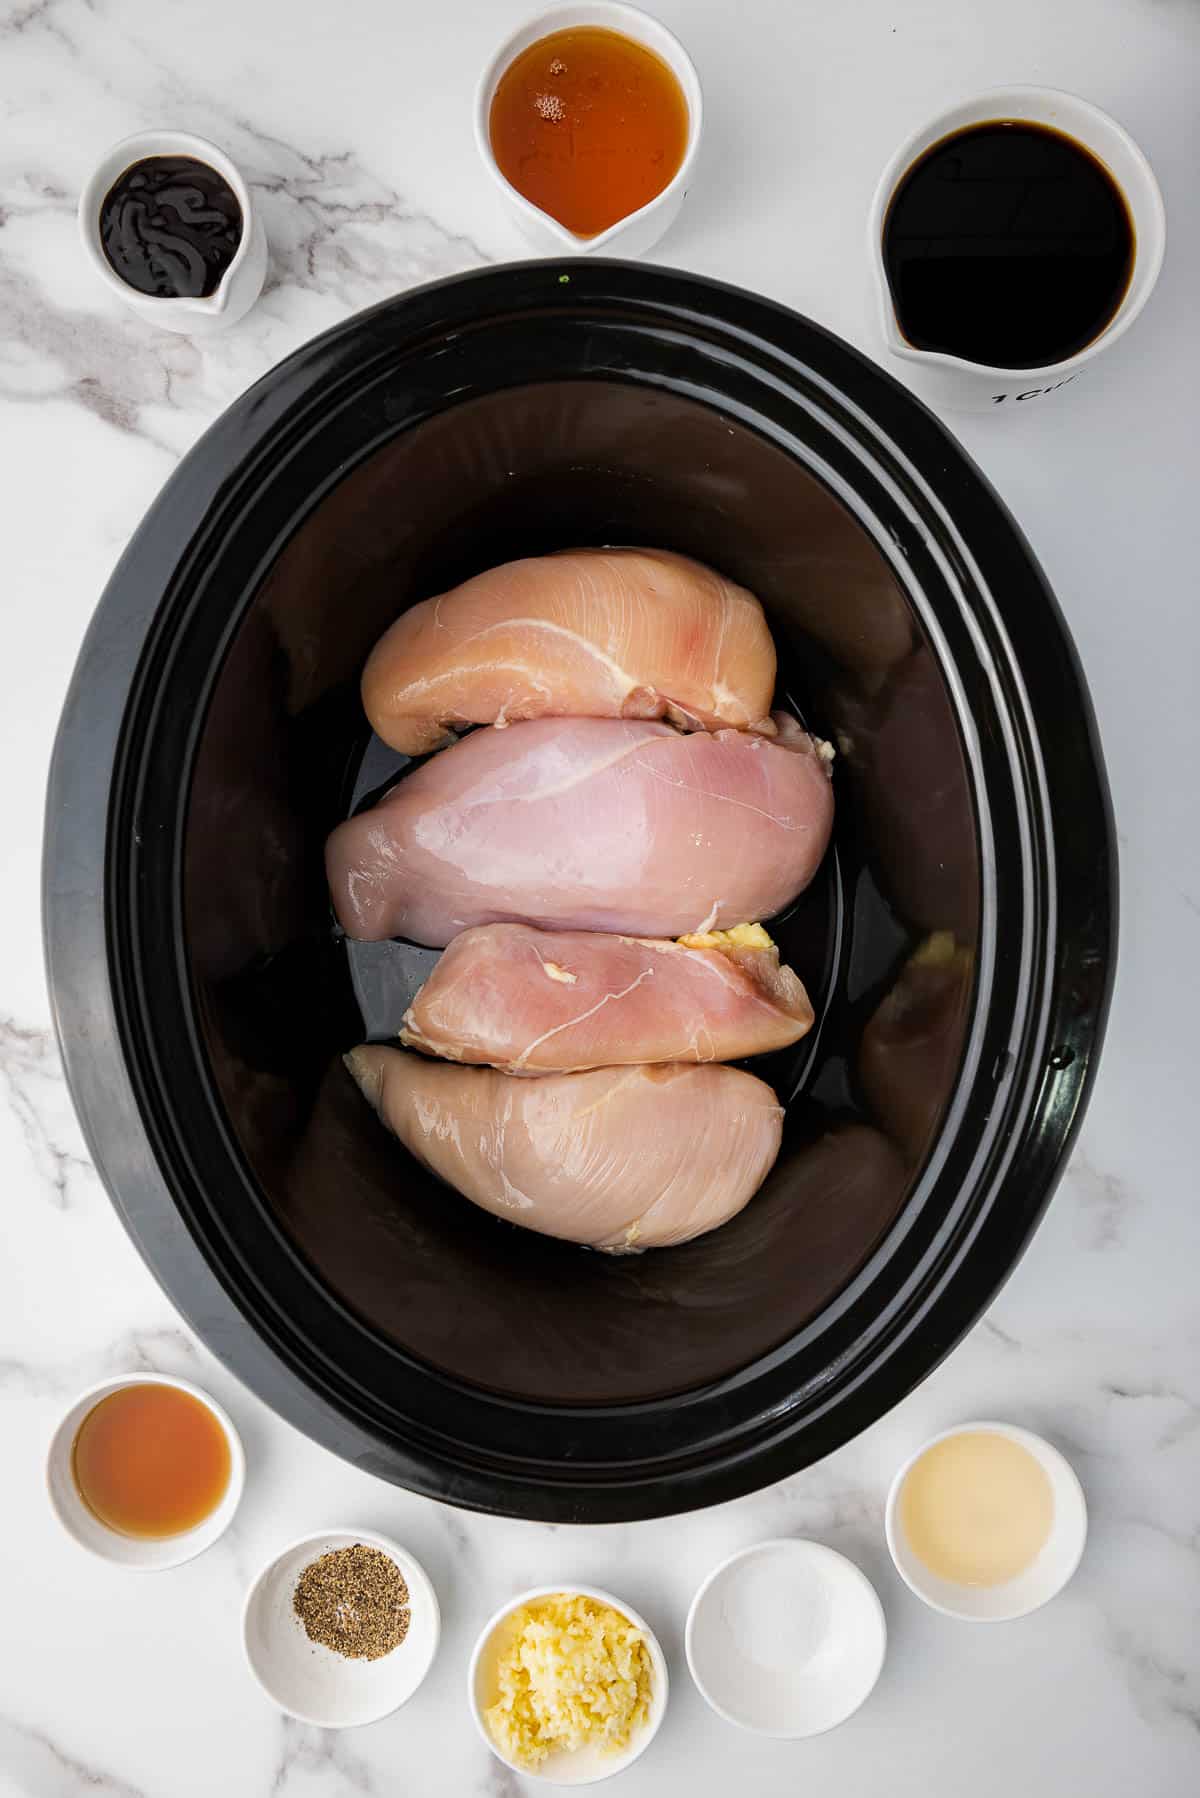 Four chicken breast fillets placed inside a slow cooker with ingredients for the honey garlic sauce in small white bowls around the slow cooker, on top of a marble surface.